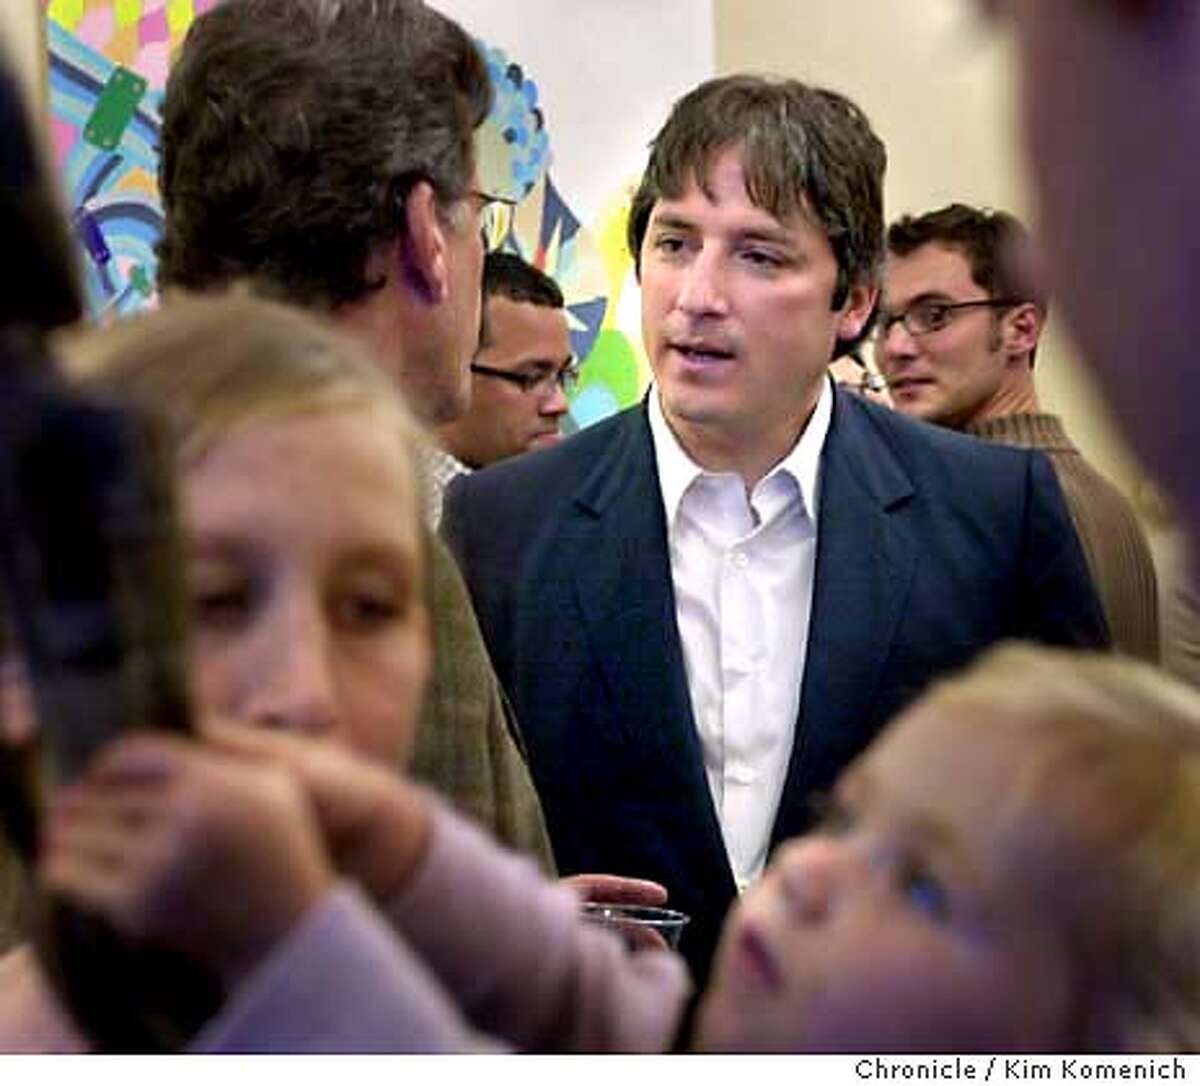 10/3/03 in San Francisco. Gonzalez, center, facing camera, talks with colleagues and attendees. Profile of S.F. Mayoral candidate Matt Gonzalez. We drop in on a reception for artist Rebecca Miller at Gonzalez's Supes President office.Her paintings will hang in Gonzalez's office during the month of October. KIM KOMENICH / The Chronicle